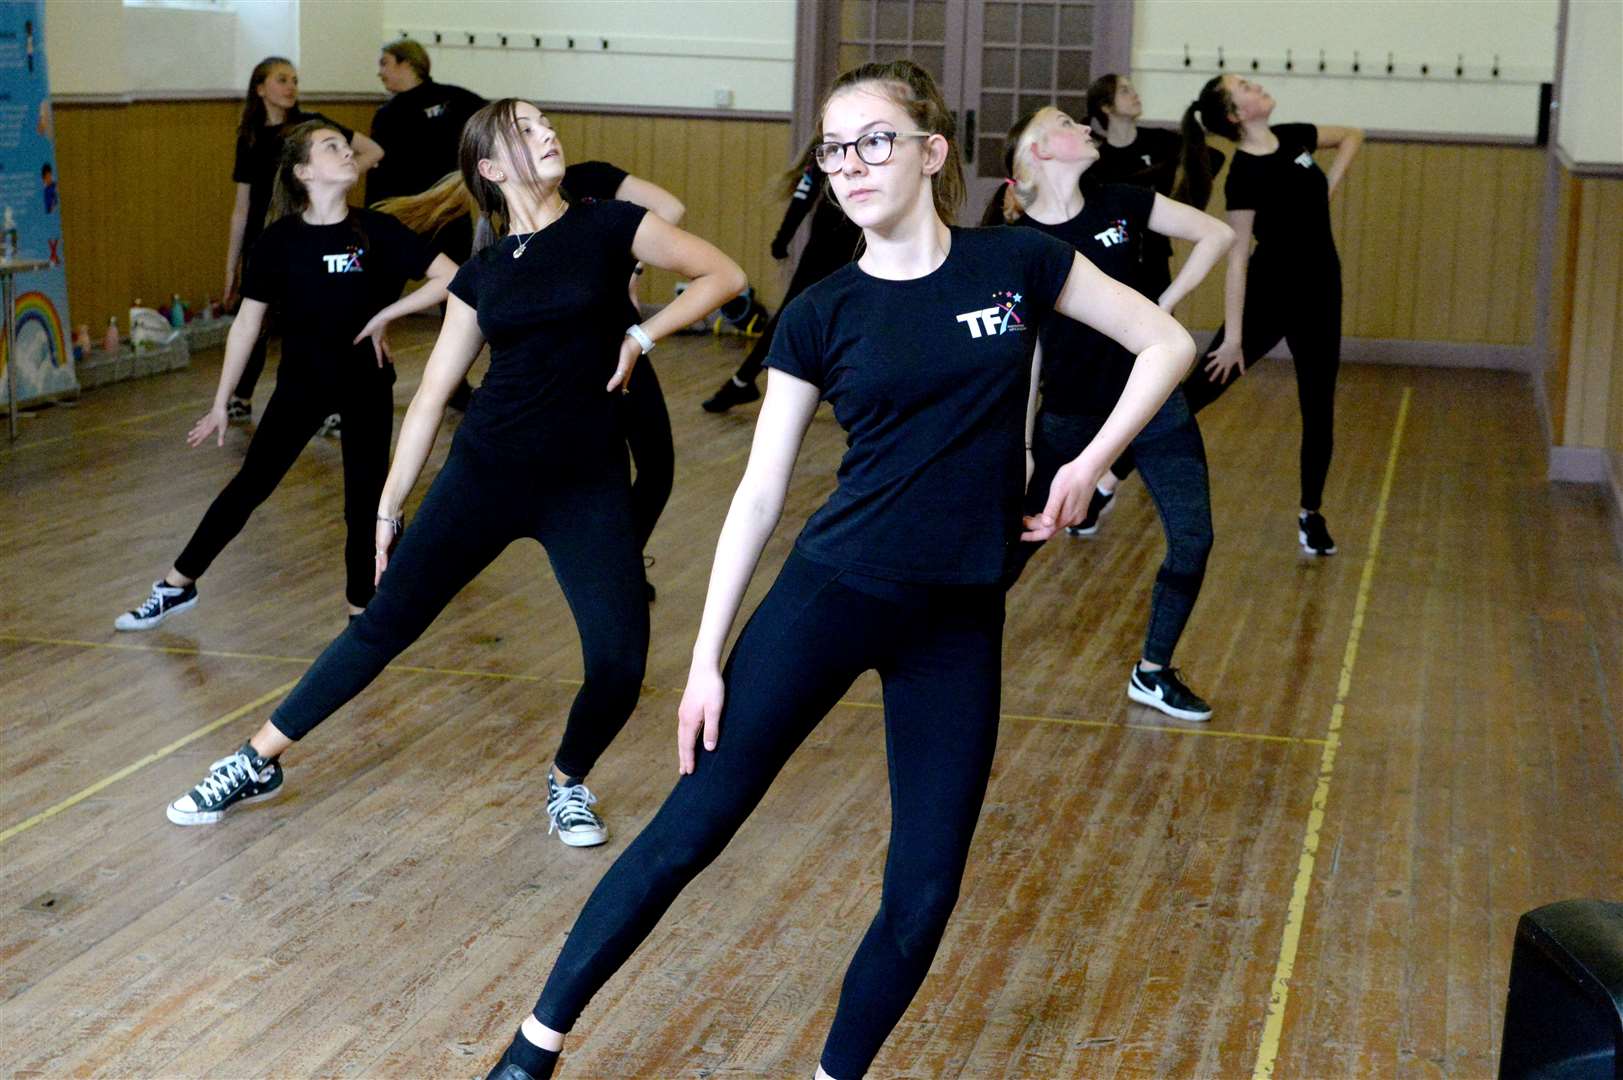 The school develops students' life skills as well as their dance ability. Picture: James Mackenzie